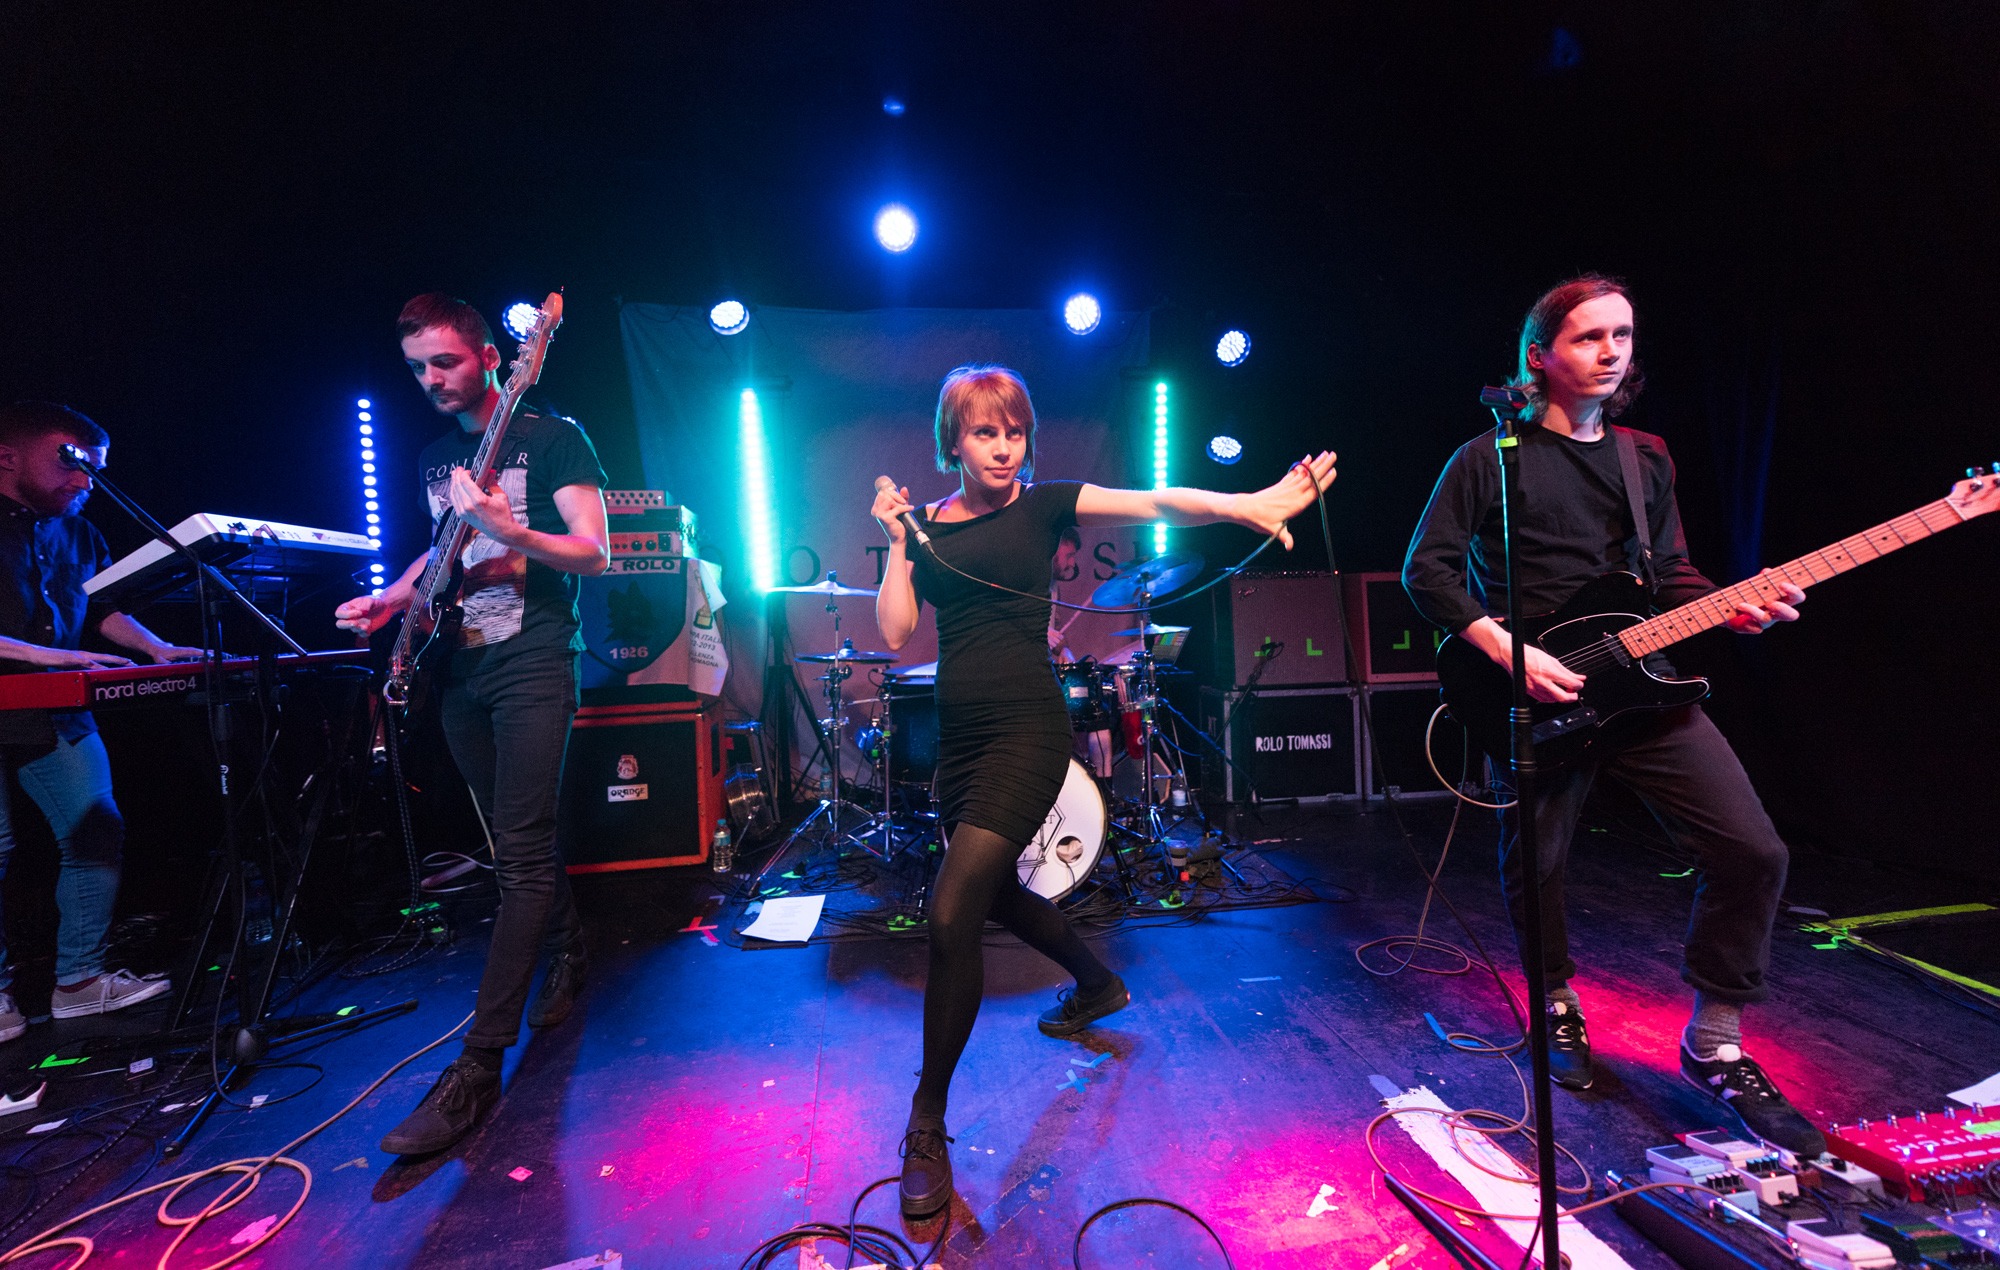 Rolo Tomassi: “There are far wider parameters to modern metal”